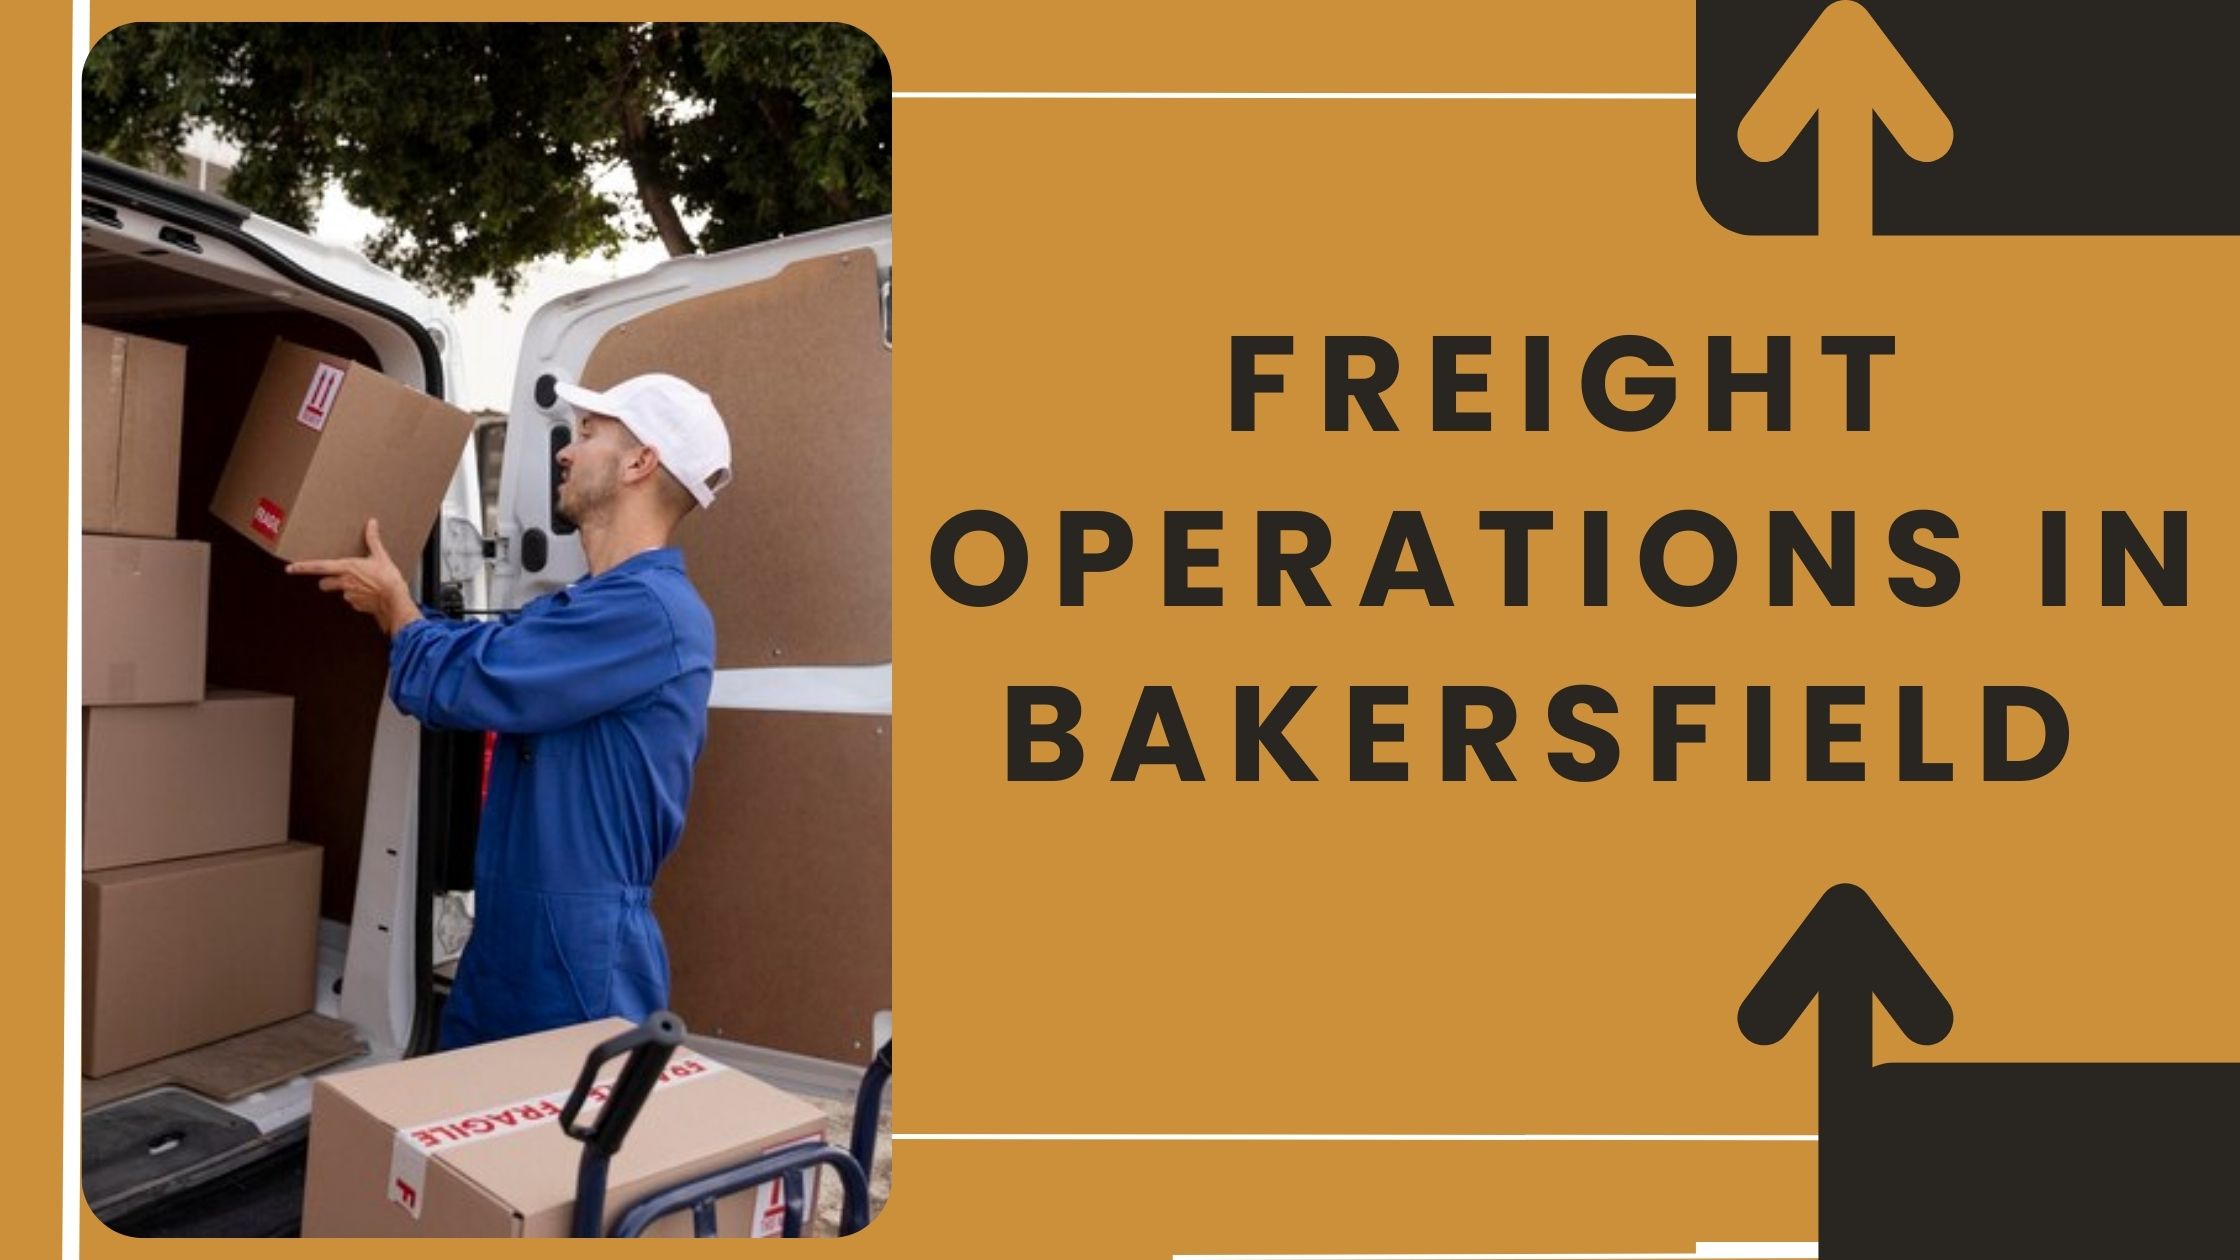 Freight Services Bakersfield